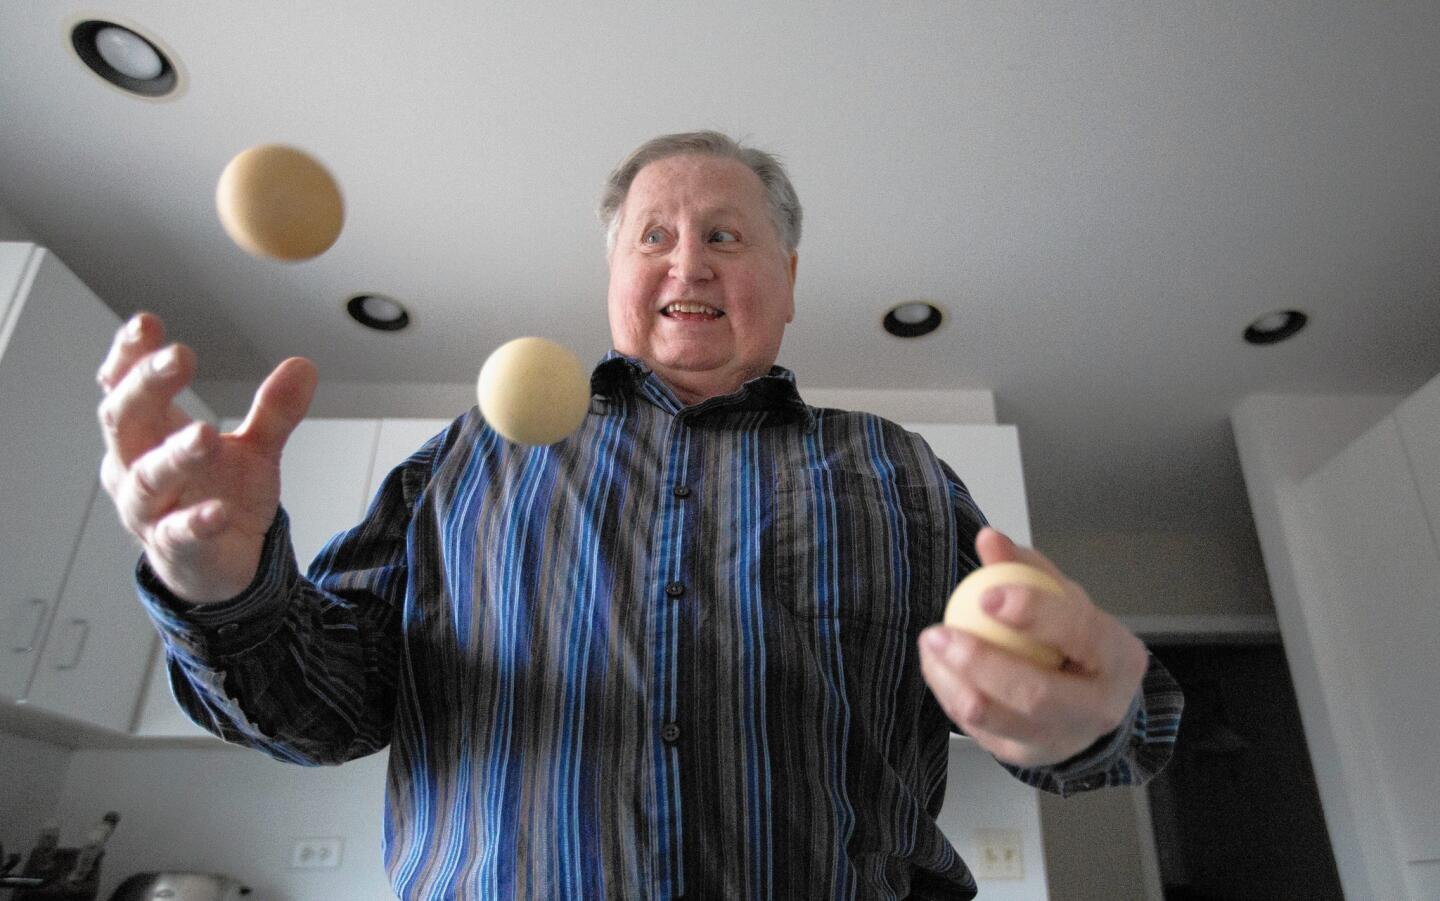 Paul Bachman performed throughout the country under his stage name, "Mr. B, the Prince of Jugglers," and appeared more than 60 times on "Bozo's Circus." Bachman died of complications related to cancer on Oct. 11 in his Orland Park home at 80. Read the obituary.